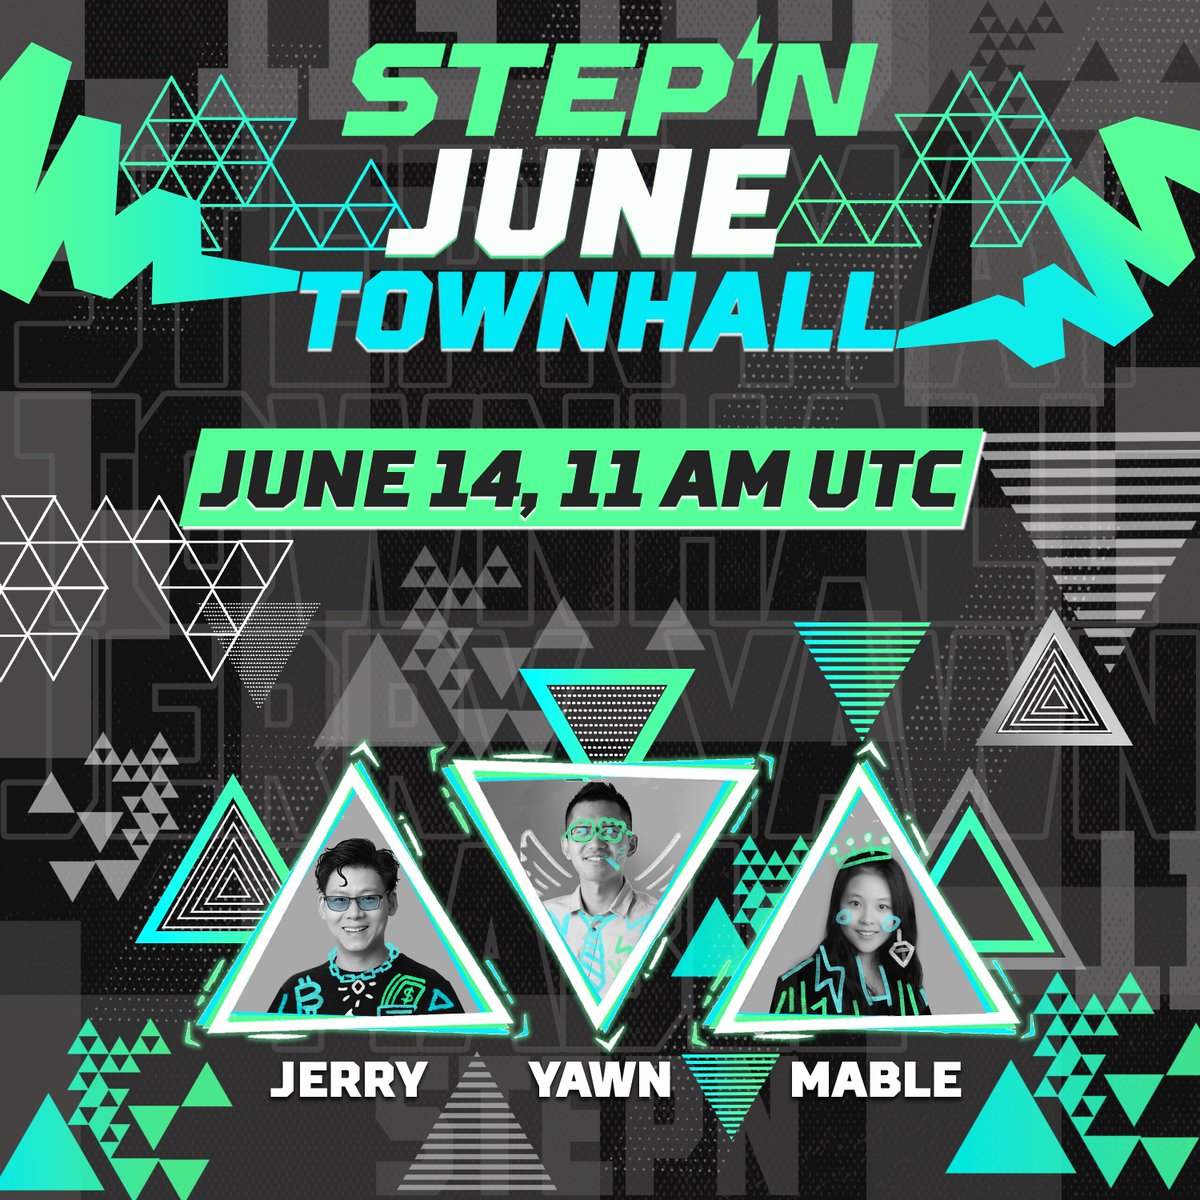 3 Hours to Go!
#STEPN Townhall June